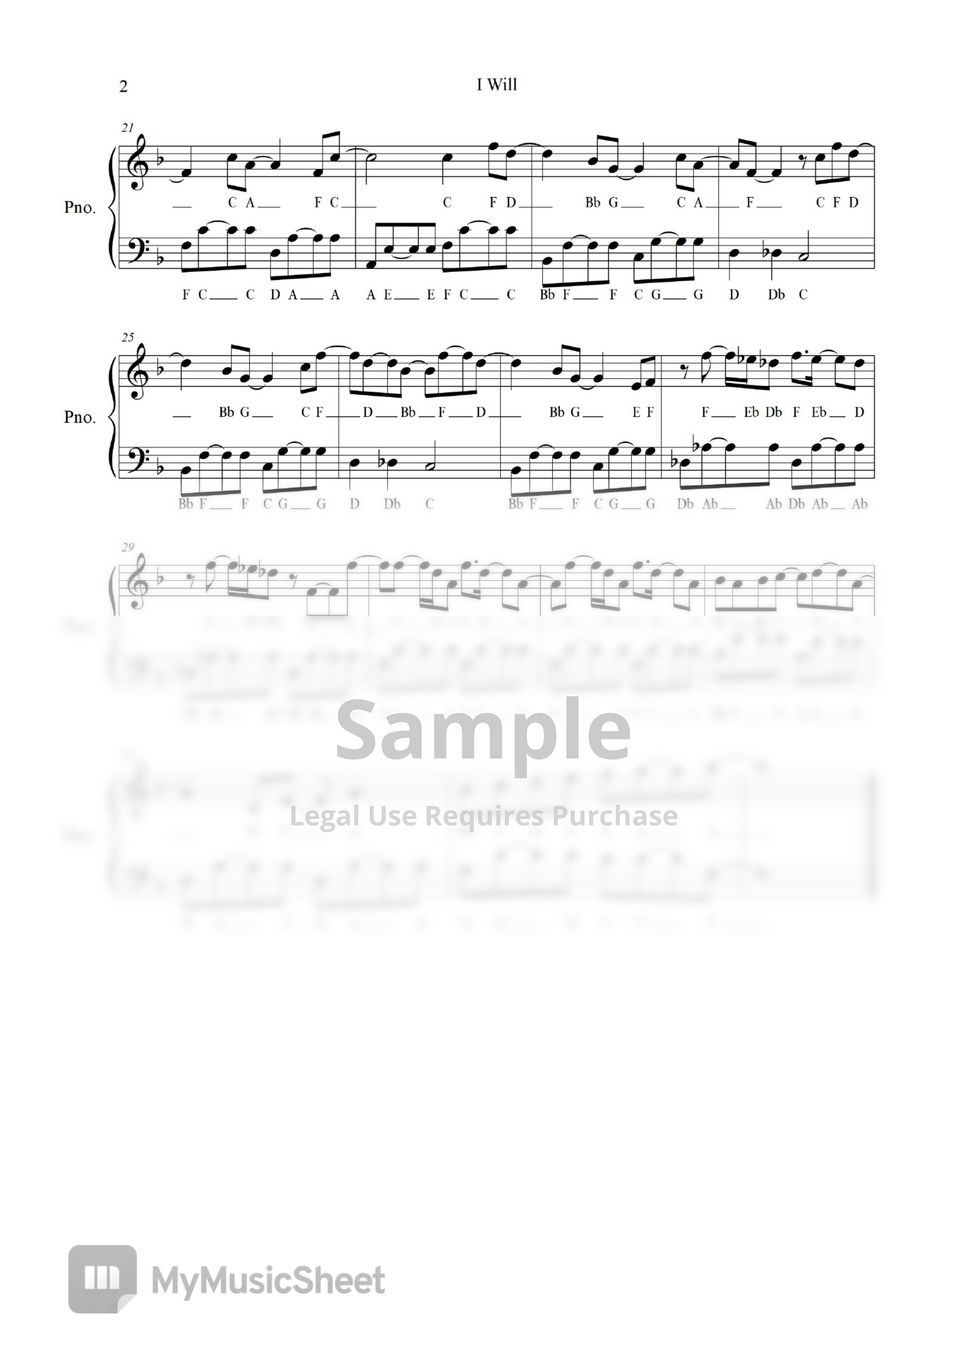 The Beatles - I Will (Notes Sheet) by freestyle pianoman